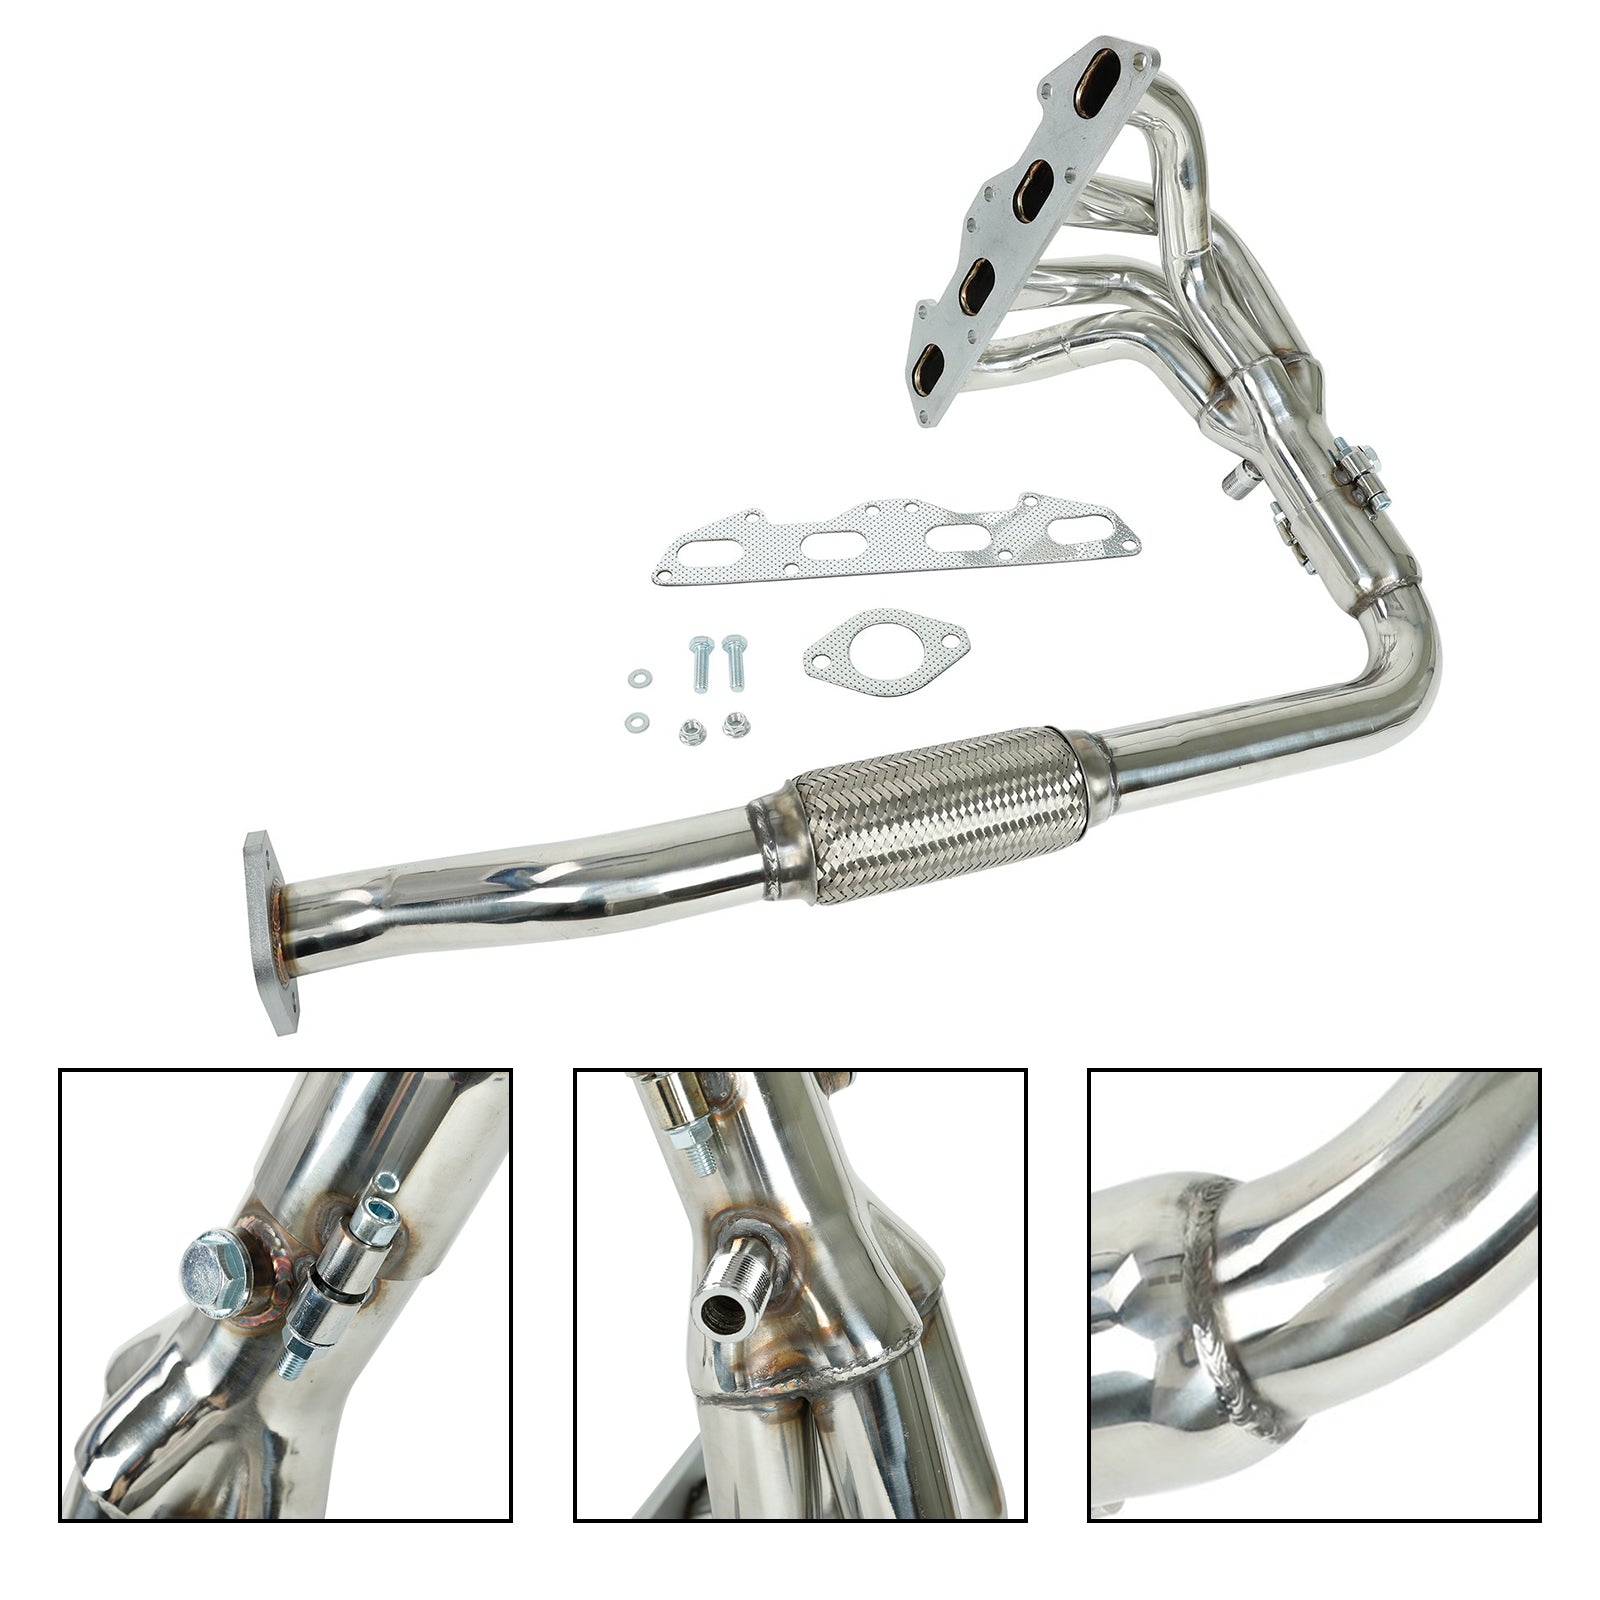 Mitsubishi 1995-1999 Eclipse Stainless Steel Auto Manifold Headers - 0